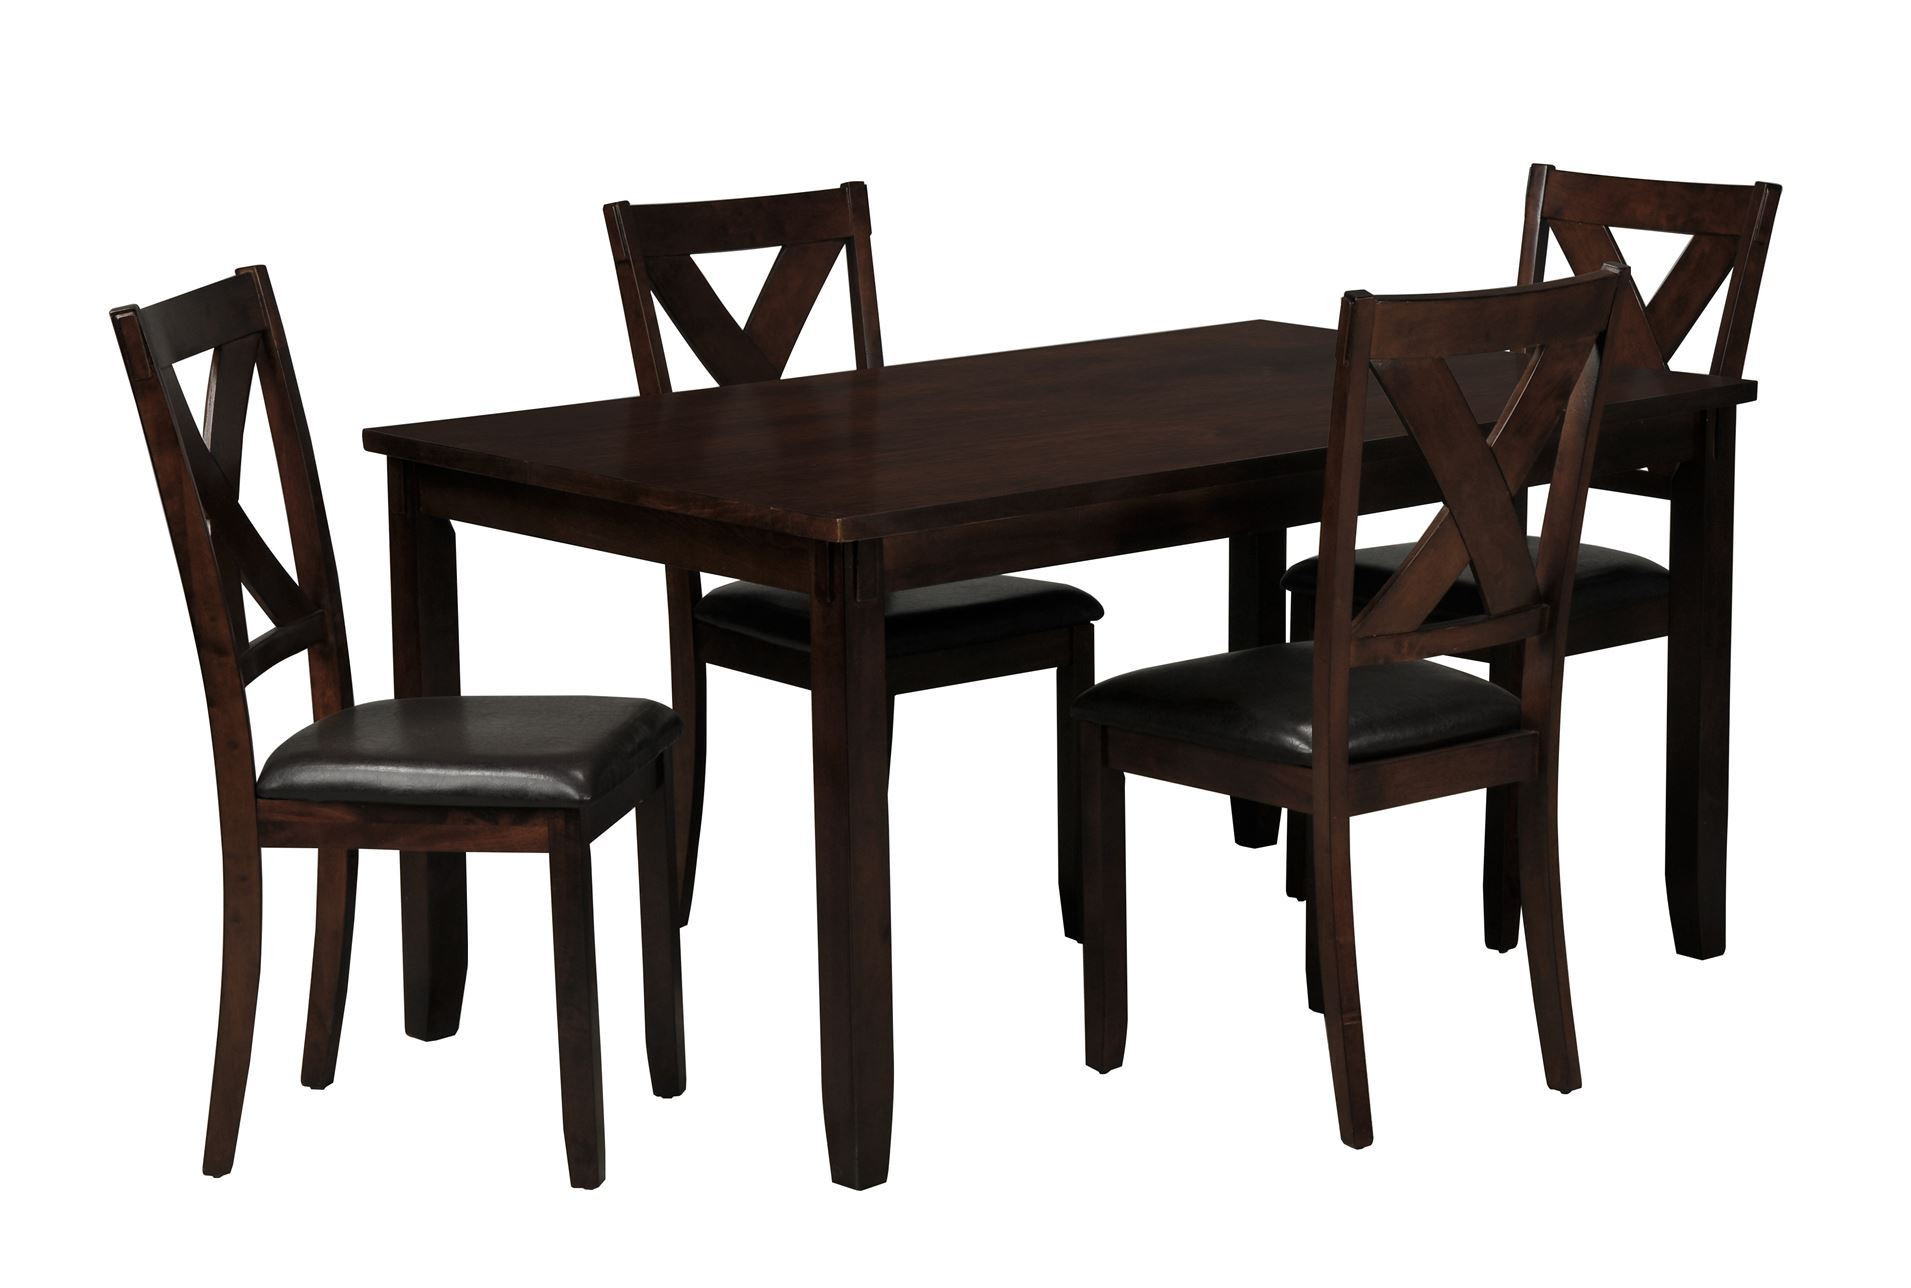 Living Spaces Dining Table
 Dakota 5 Piece Dining Table W Side Chairs Living Spaces